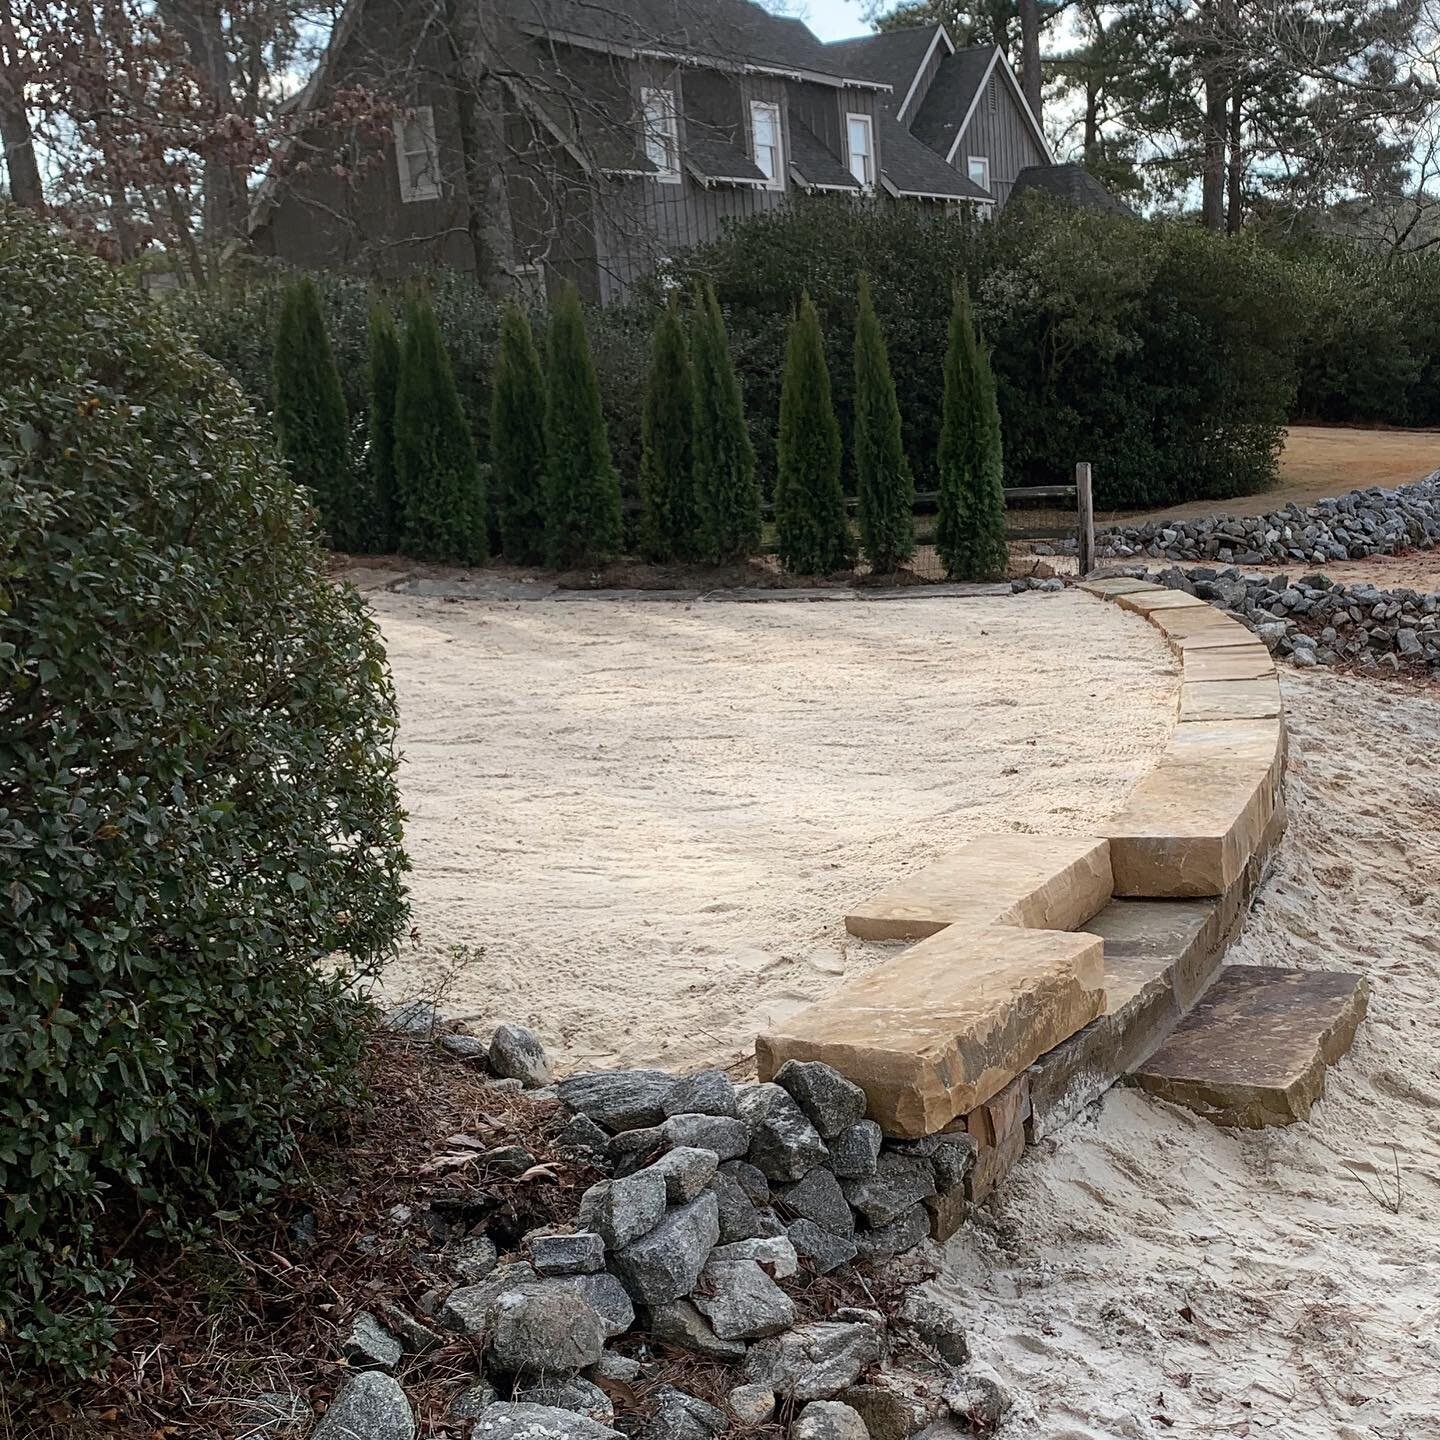 We were able to pour a proper footing and reset this ledge rock retaining wall with a gentle, more aesthetic, contour. Finish with an arborvitae screen and our wonderful clients are beach ready to enjoy another amazing season on Lake Martin.

#ledger